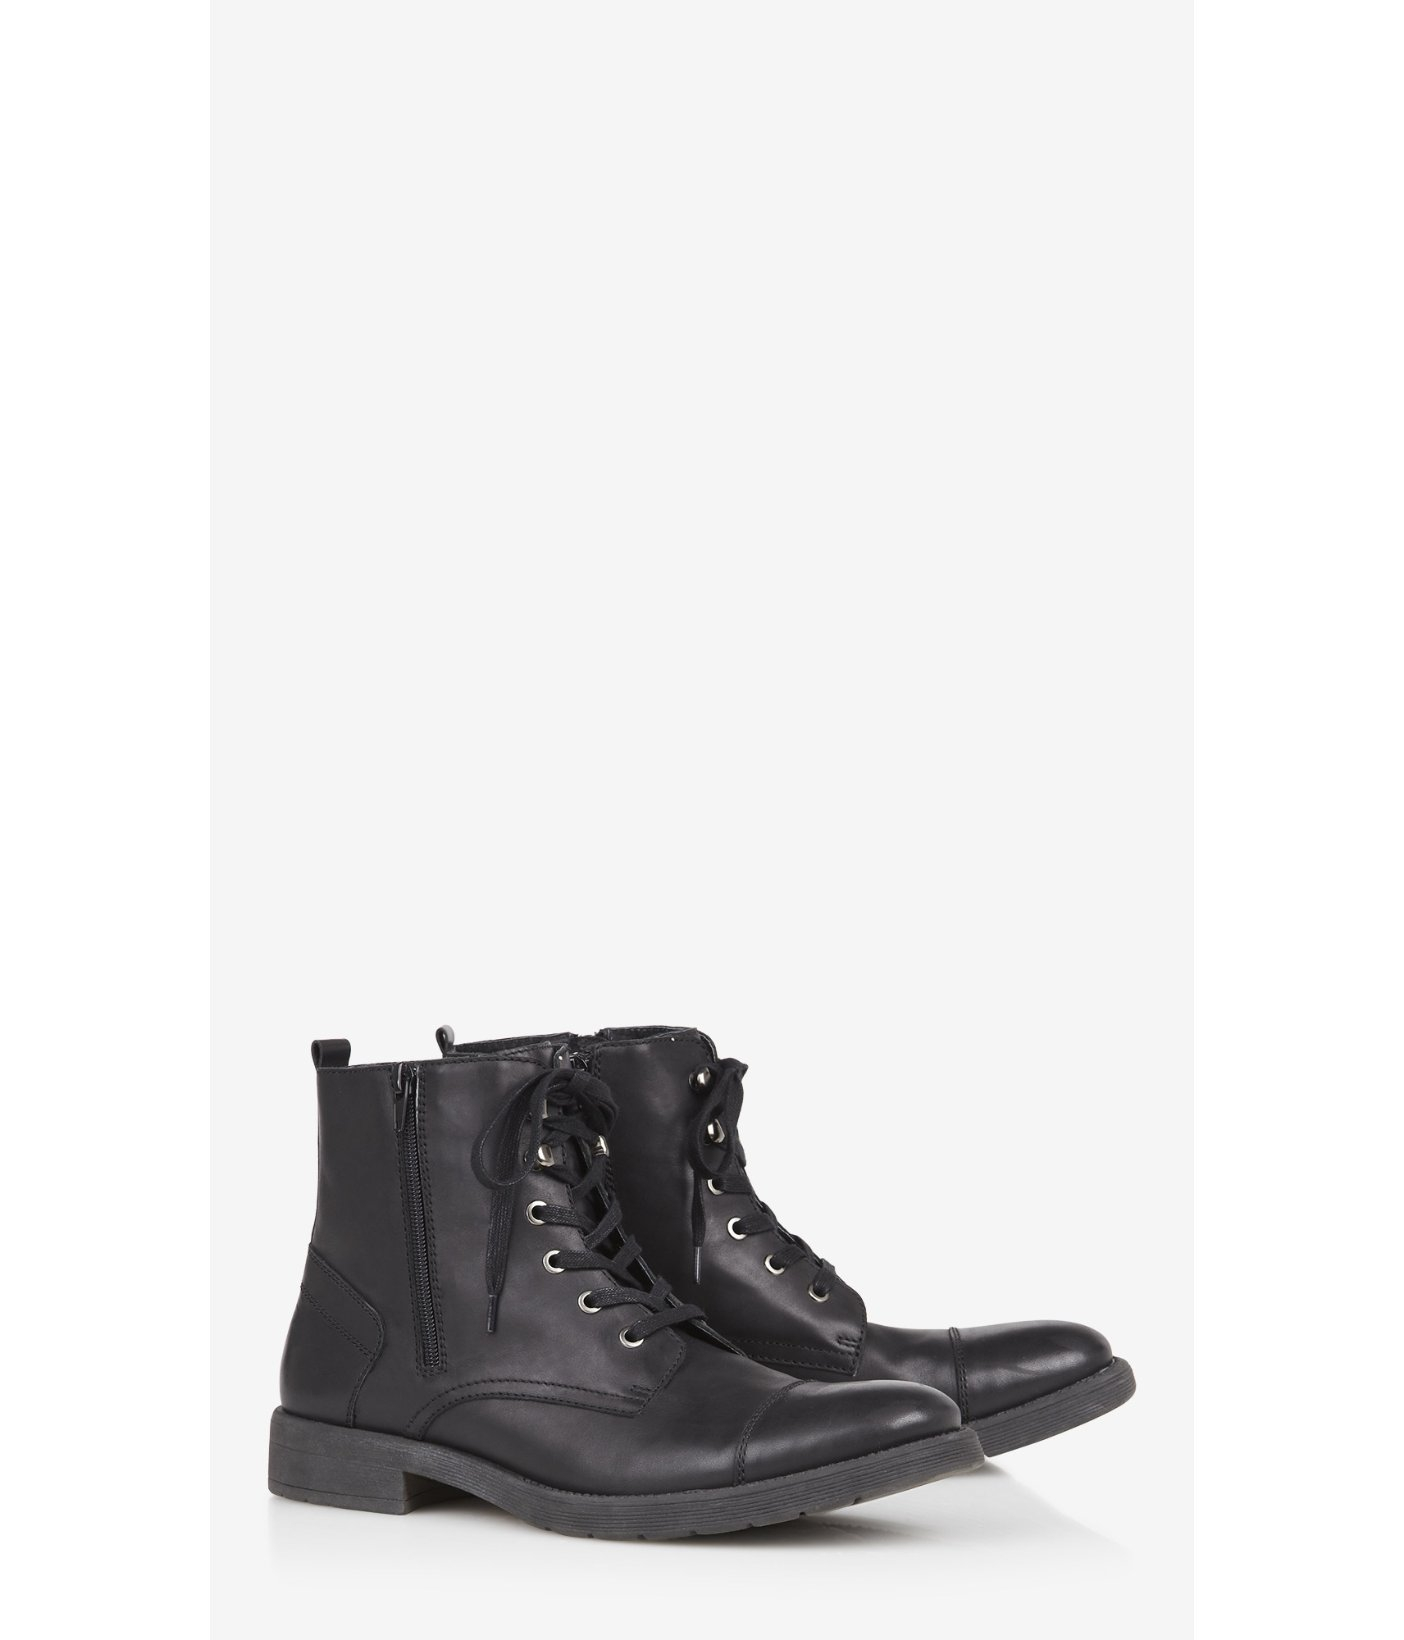 Express Black Leather Double Zip Boot 